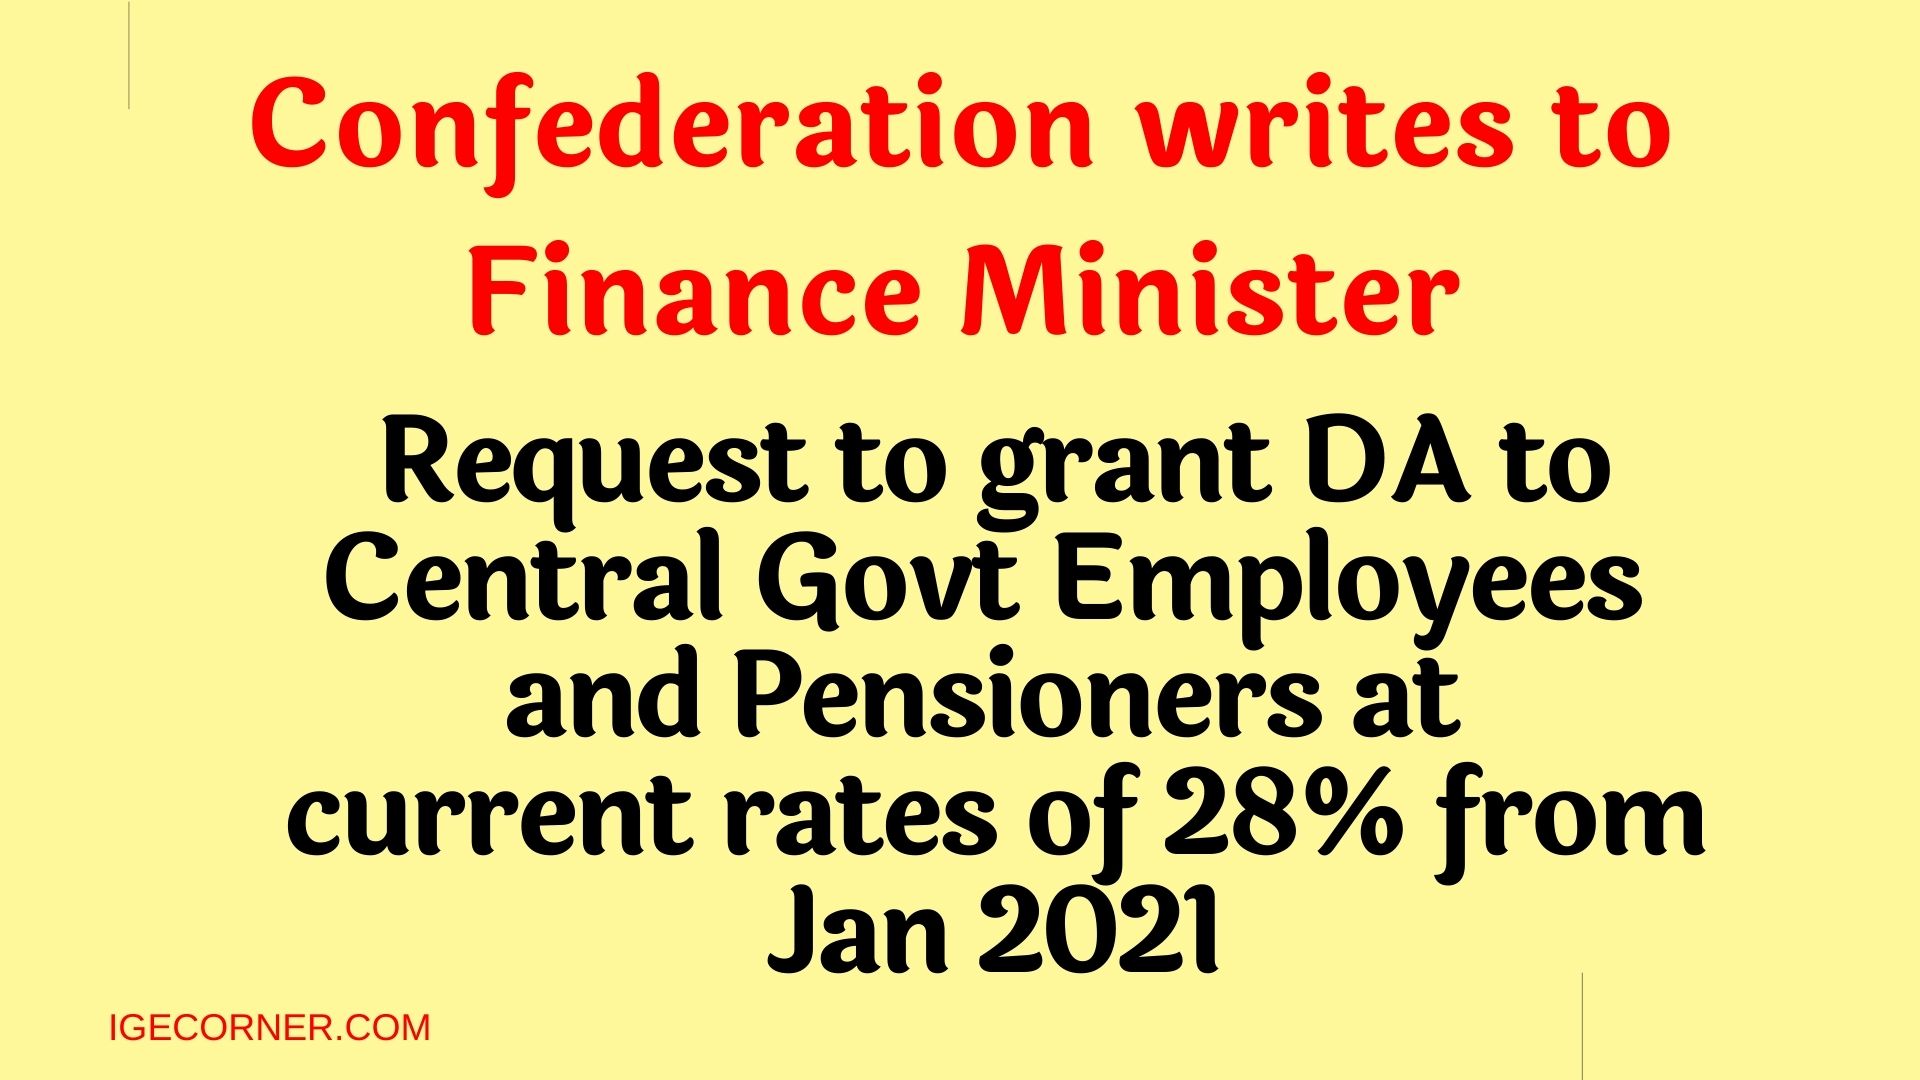 Grant DA to Central Government Employees and Pensioners at current